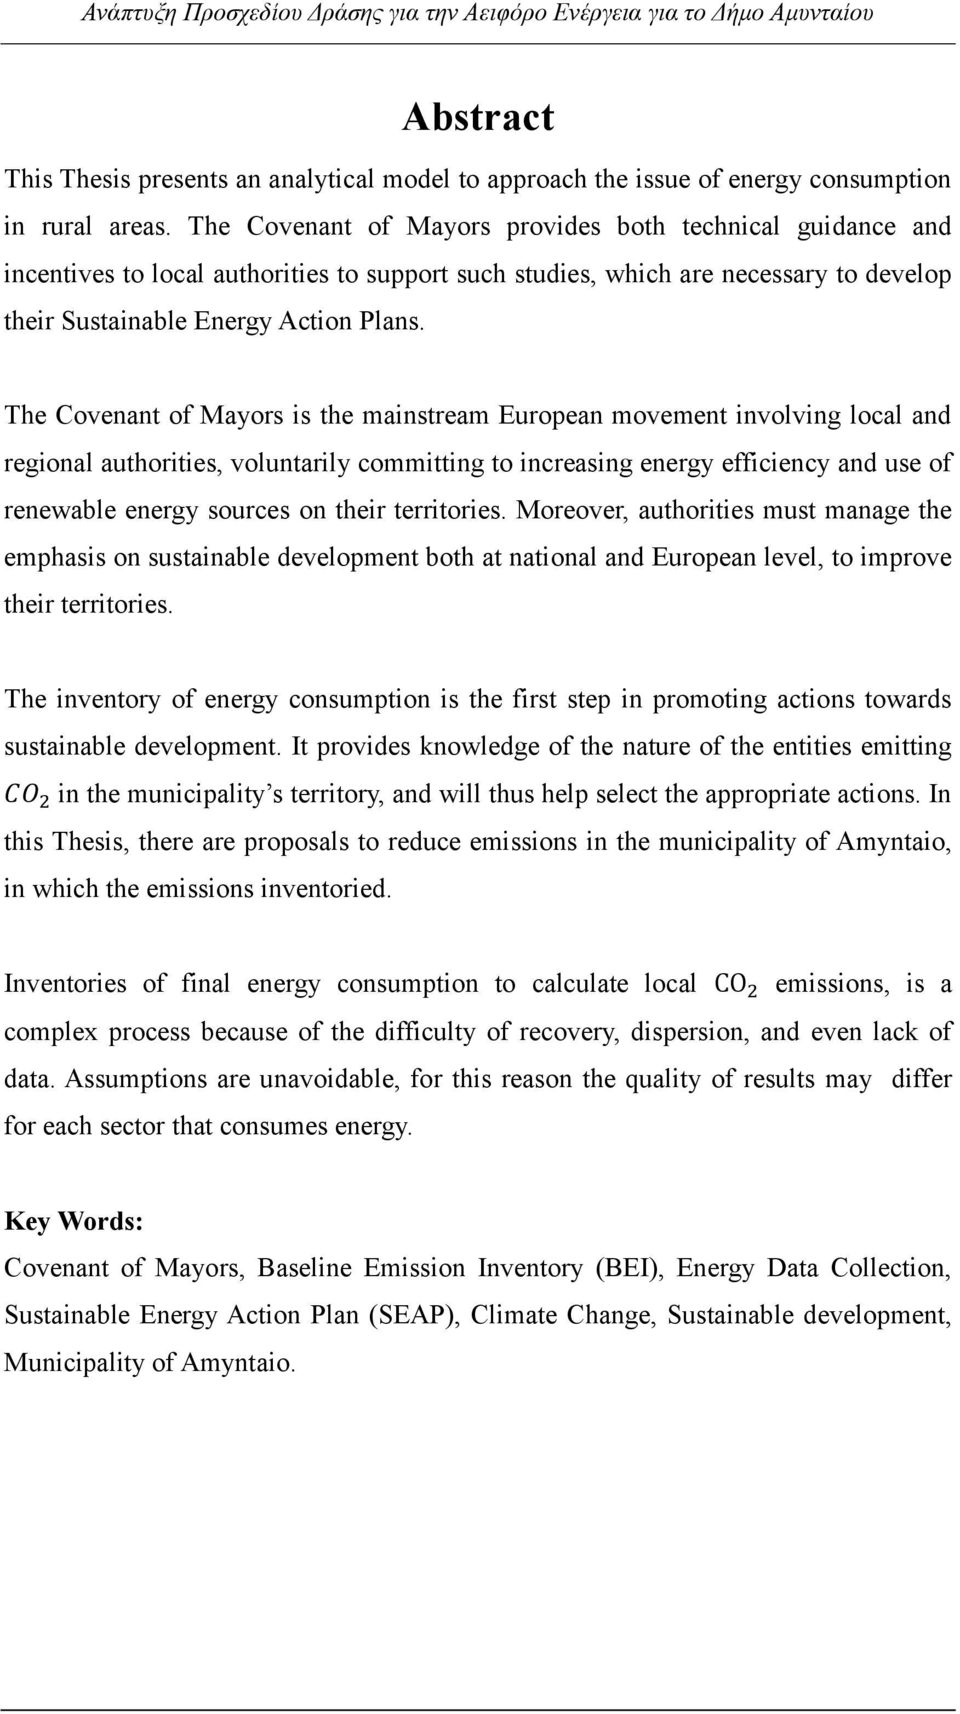 The Covenant of Mayors is the mainstream European movement involving local and regional authorities, voluntarily committing to increasing energy efficiency and use of renewable energy sources on